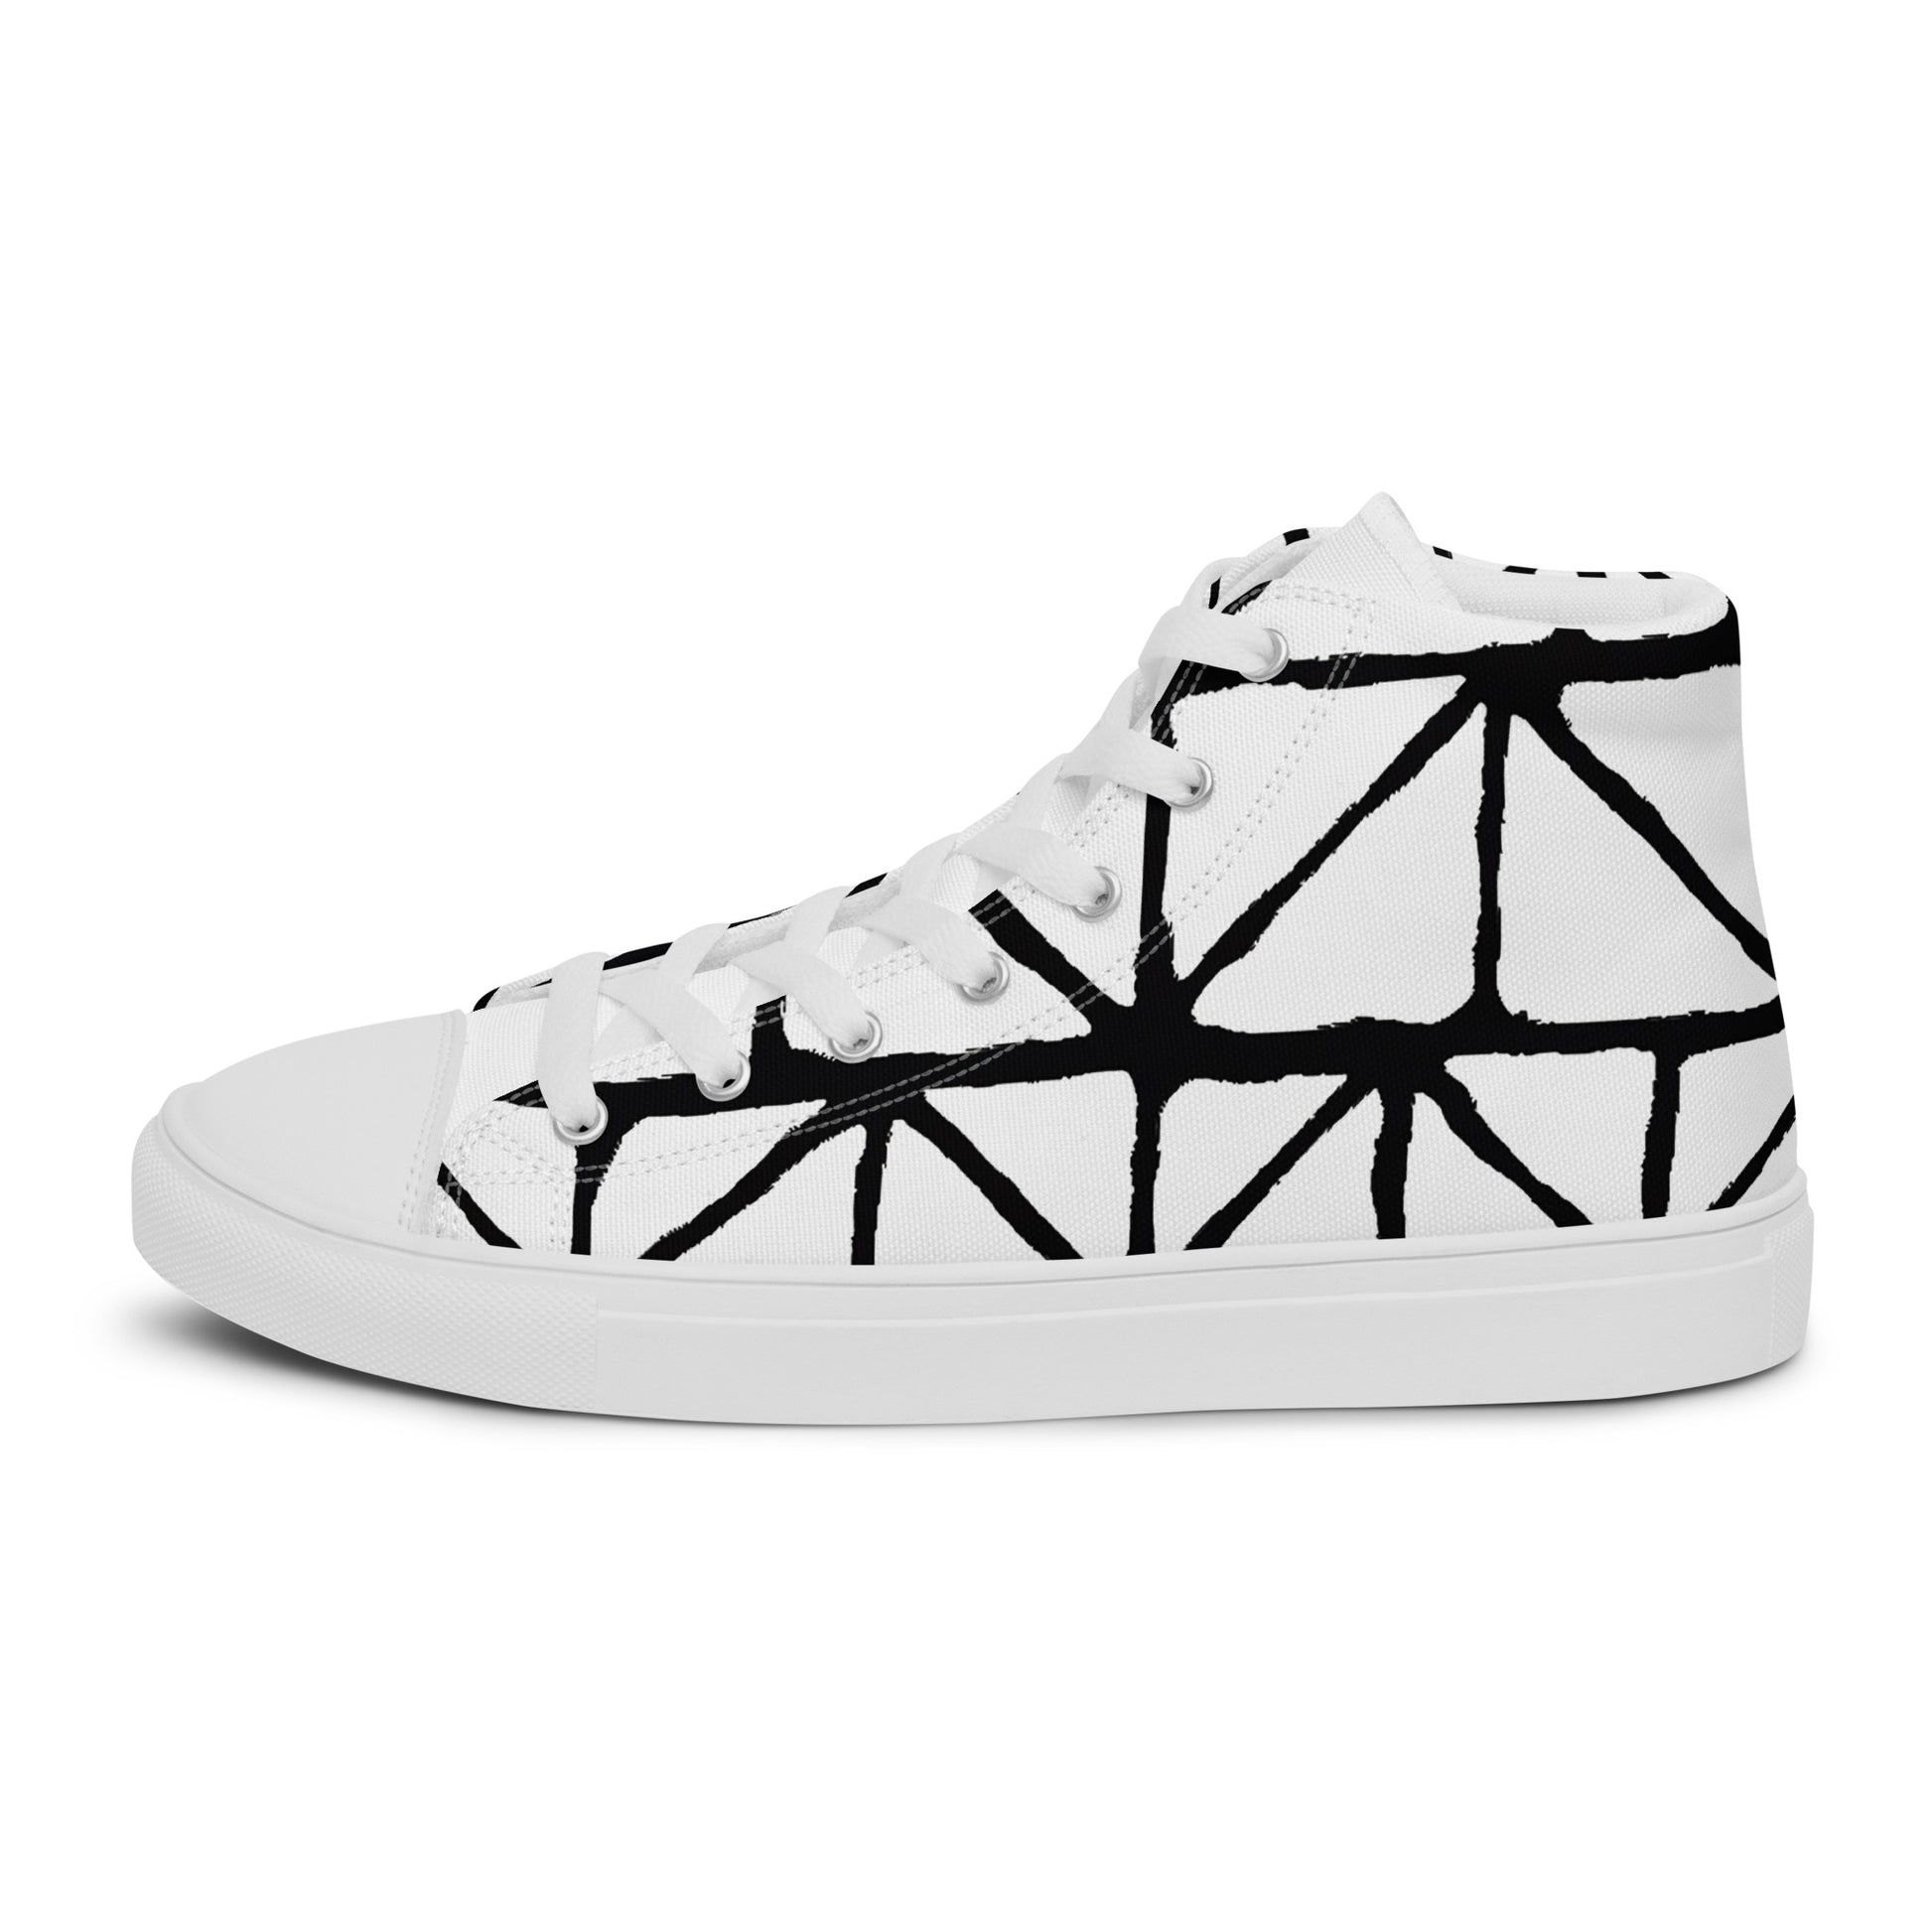 Tribal Black and White Men’s High Top Canvas Shoes | Geometric Print Shoes | Stylish Festival Sneakers | Casual Style | Lace Up Sneakers - Comfortable Culture - 5 - Shoes - Comfortable Culture